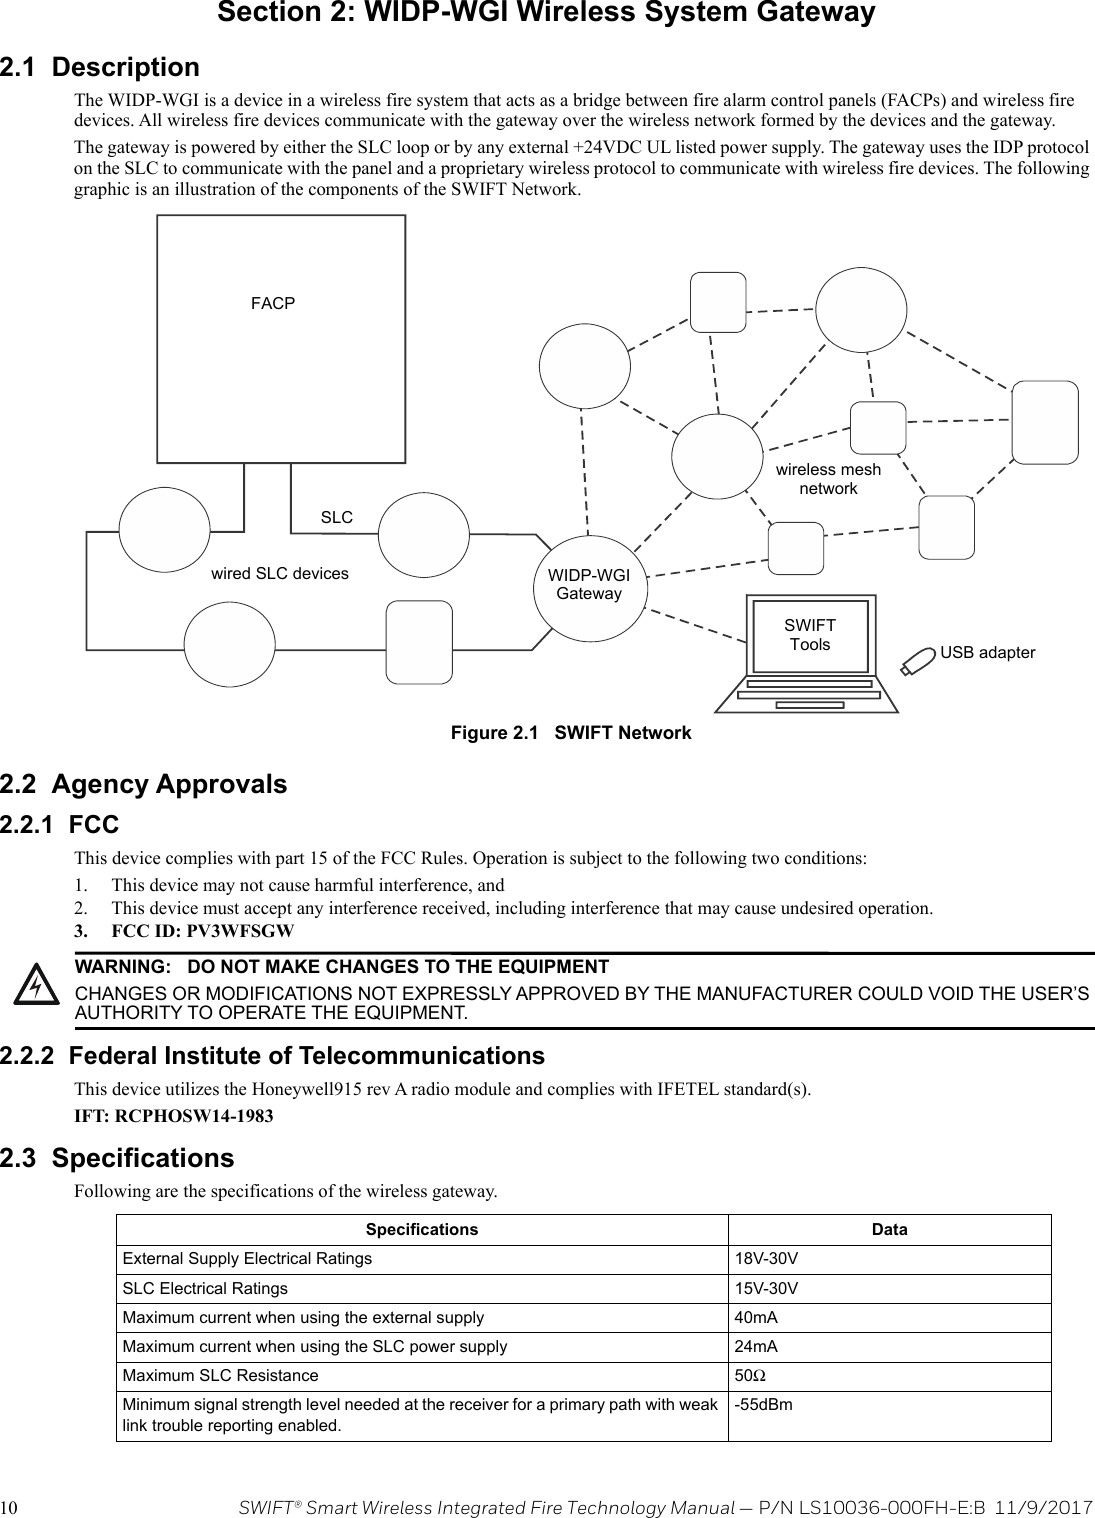 10 SWIFT® Smart Wireless Integrated Fire Technology Manual — P/N LS10036-000FH-E:B  11/9/2017Section 2: WIDP-WGI Wireless System Gateway2.1  DescriptionThe WIDP-WGI is a device in a wireless fire system that acts as a bridge between fire alarm control panels (FACPs) and wireless fire devices. All wireless fire devices communicate with the gateway over the wireless network formed by the devices and the gateway. The gateway is powered by either the SLC loop or by any external +24VDC UL listed power supply. The gateway uses the IDP protocol on the SLC to communicate with the panel and a proprietary wireless protocol to communicate with wireless fire devices. The following graphic is an illustration of the components of the SWIFT Network.    2.2  Agency Approvals2.2.1  FCCThis device complies with part 15 of the FCC Rules. Operation is subject to the following two conditions: 1. This device may not cause harmful interference, and 2. This device must accept any interference received, including interference that may cause undesired operation.3. FCC ID: PV3WFSGW2.2.2  Federal Institute of TelecommunicationsThis device utilizes the Honeywell915 rev A radio module and complies with IFETEL standard(s).IFT: RCPHOSW14-19832.3  SpecificationsFollowing are the specifications of the wireless gateway.  Figure 2.1   SWIFT NetworkFACPSLCwired SLC devices WIDP-WGIGatewaywireless mesh networkSWIFTTools USB adapter!WARNING: DO NOT MAKE CHANGES TO THE EQUIPMENTCHANGES OR MODIFICATIONS NOT EXPRESSLY APPROVED BY THE MANUFACTURER COULD VOID THE USER’S AUTHORITY TO OPERATE THE EQUIPMENT.Specifications DataExternal Supply Electrical Ratings 18V-30VSLC Electrical Ratings 15V-30VMaximum current when using the external supply 40mAMaximum current when using the SLC power supply 24mAMaximum SLC Resistance 50ΩMinimum signal strength level needed at the receiver for a primary path with weak link trouble reporting enabled.-55dBm